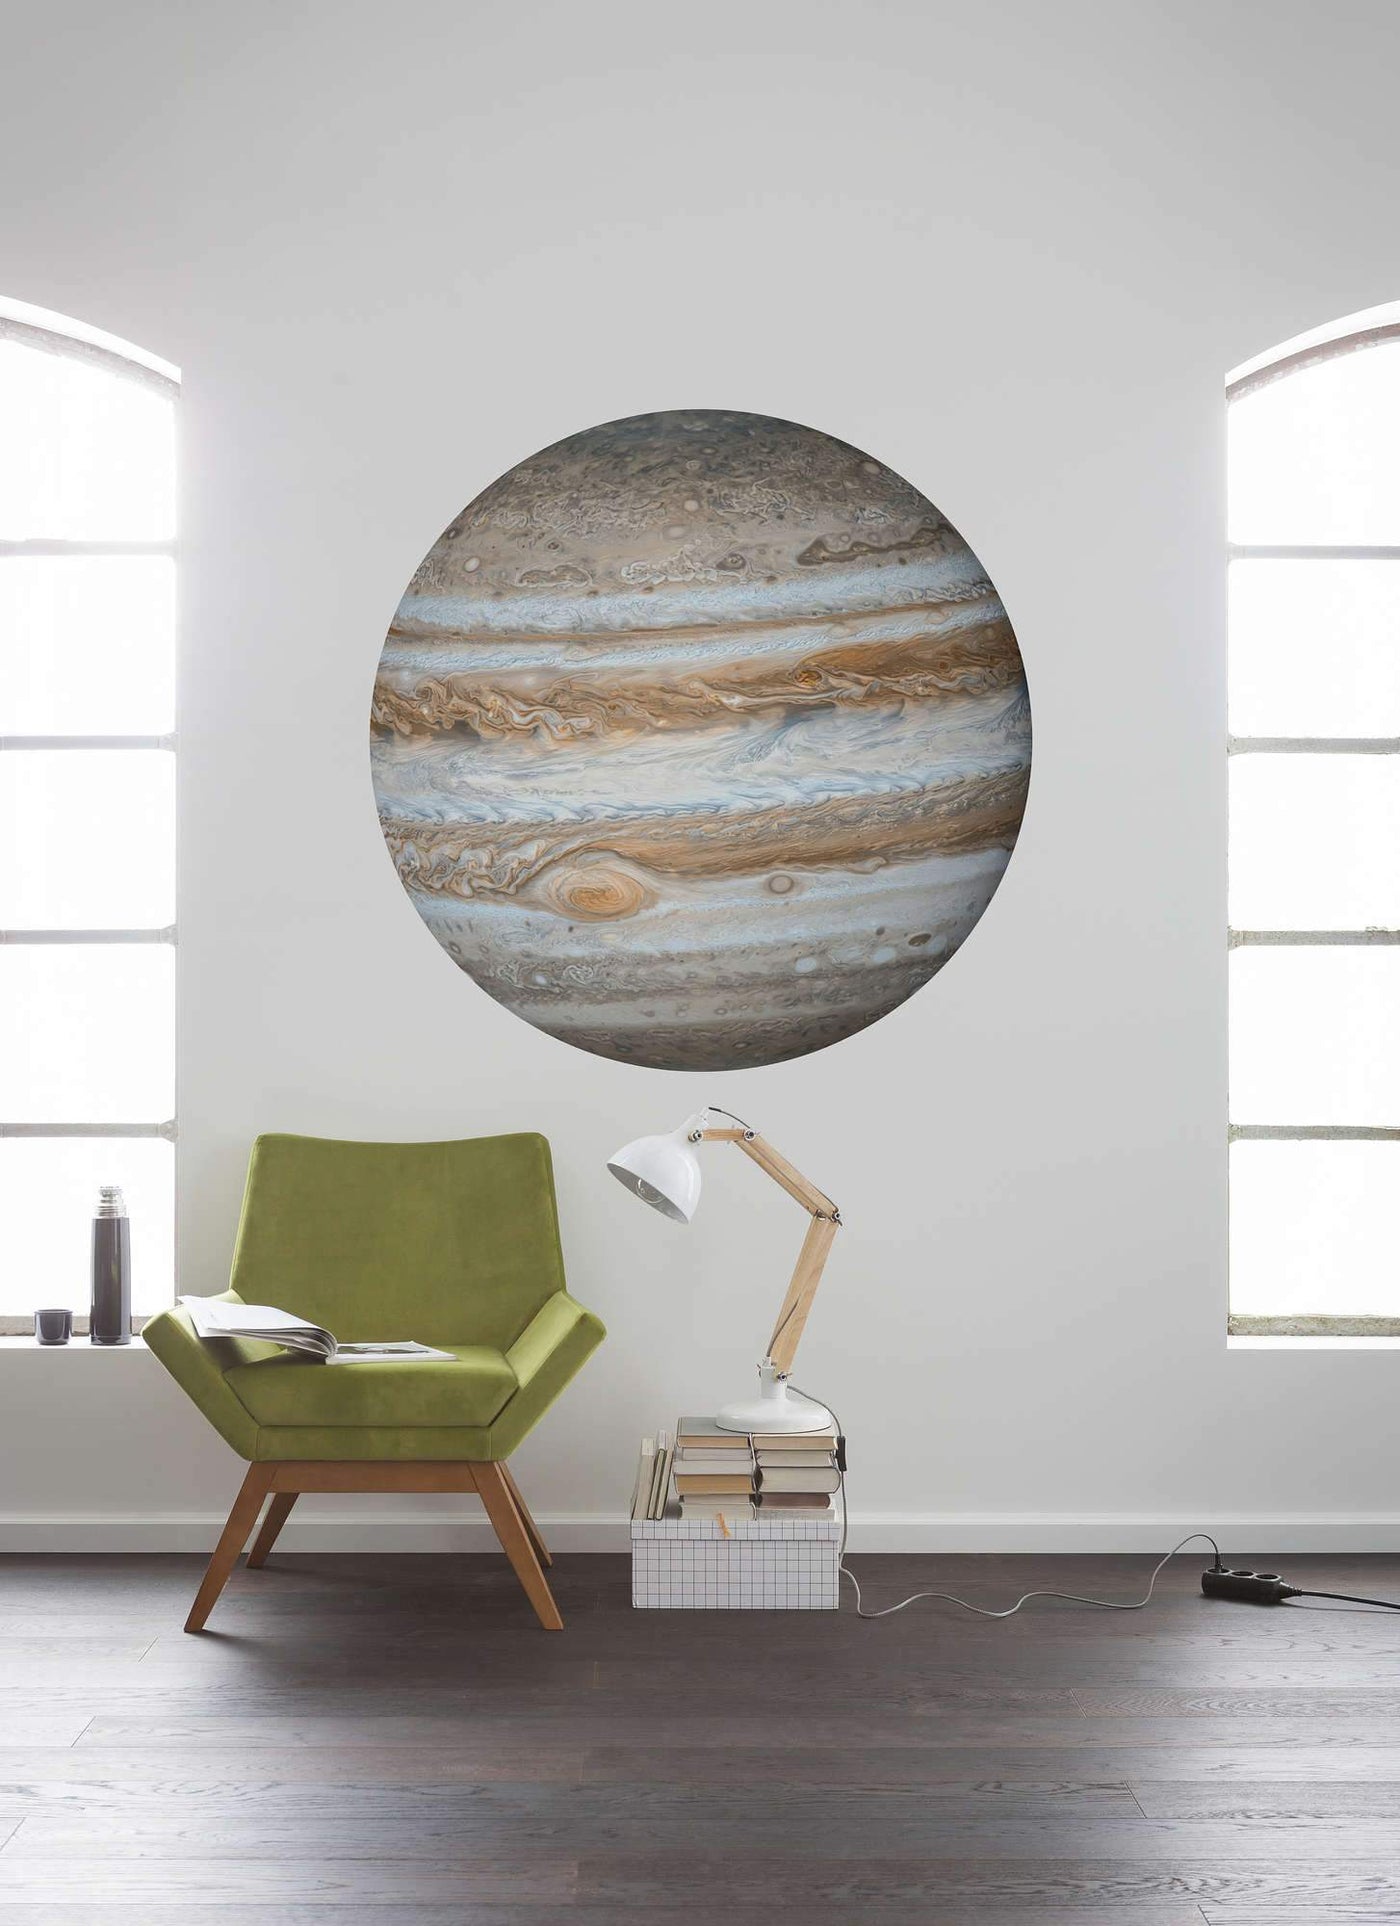 Planet Jupiter Circle Wall Art (Self-Adhesive)-Wall Decor-ABSTRACT WALLPAPERS, ART WALLPAPER, CIRCLE WALL ART, ECO MURALS, NATURE WALL ART, PATTERN WALLPAPERS, SUSTAINABLE DECOR-Forest Homes-Nature inspired decor-Nature decor